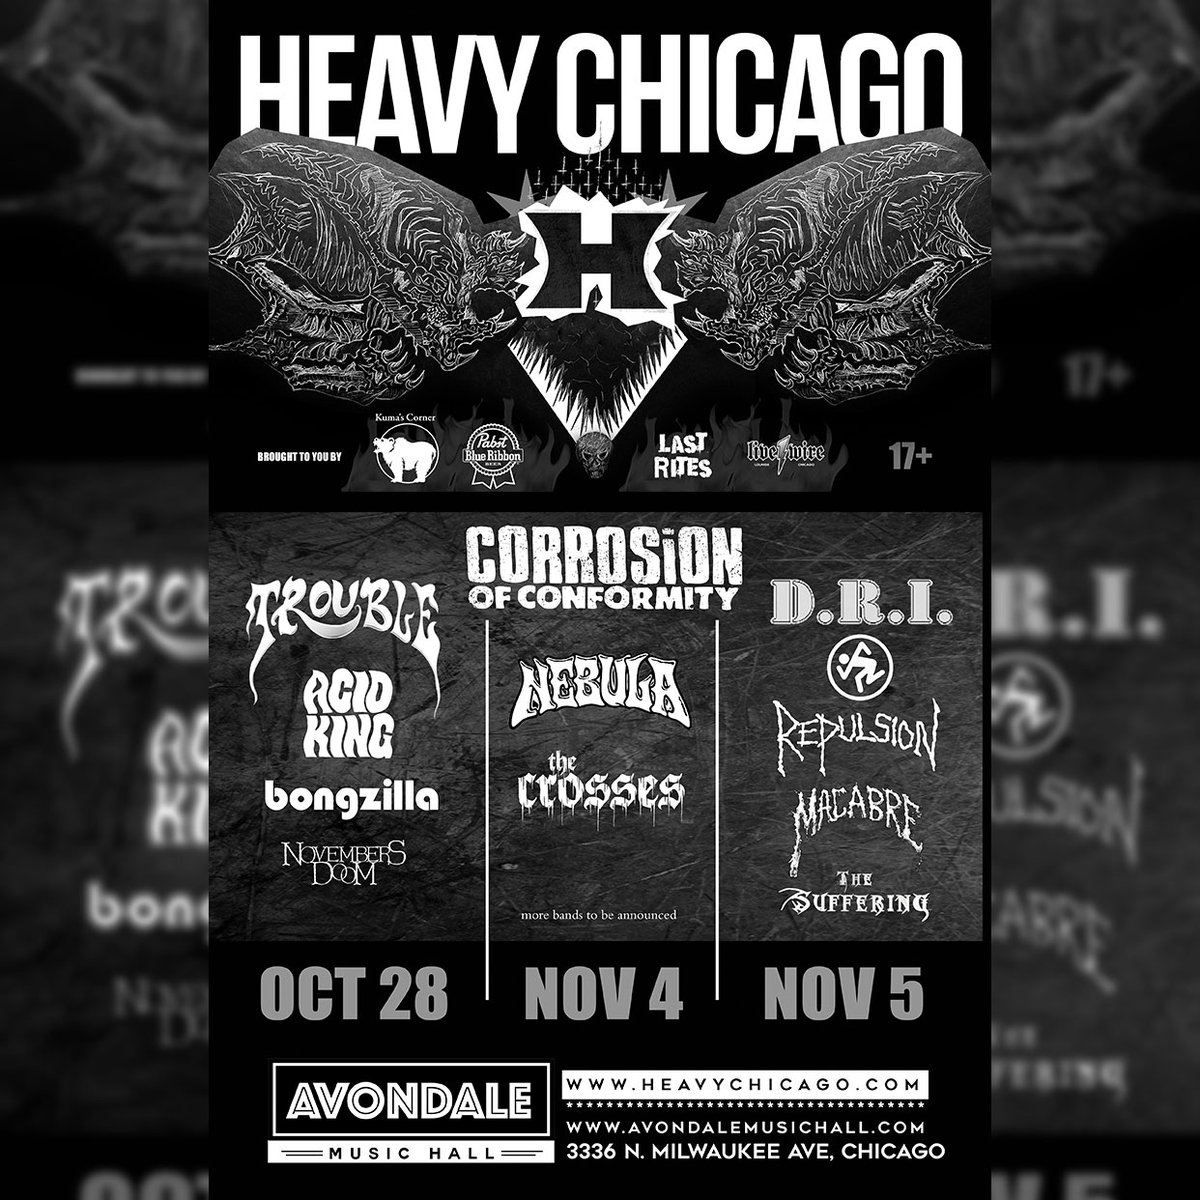 Kuma’s Corner, @pabstblueribbon, @lastritesevents, & @LiveWireLounge is proud to announce...

HEAVY CHICAGO!

A New Metal Fest in Chicago happening 10/28, 11/4, & 11/5
Featuring: @coccabal, @DRI_Band, @RepulsionBand, @Troublemetal

Pre-Sale Begins 6.23 at HeavyChicago.com